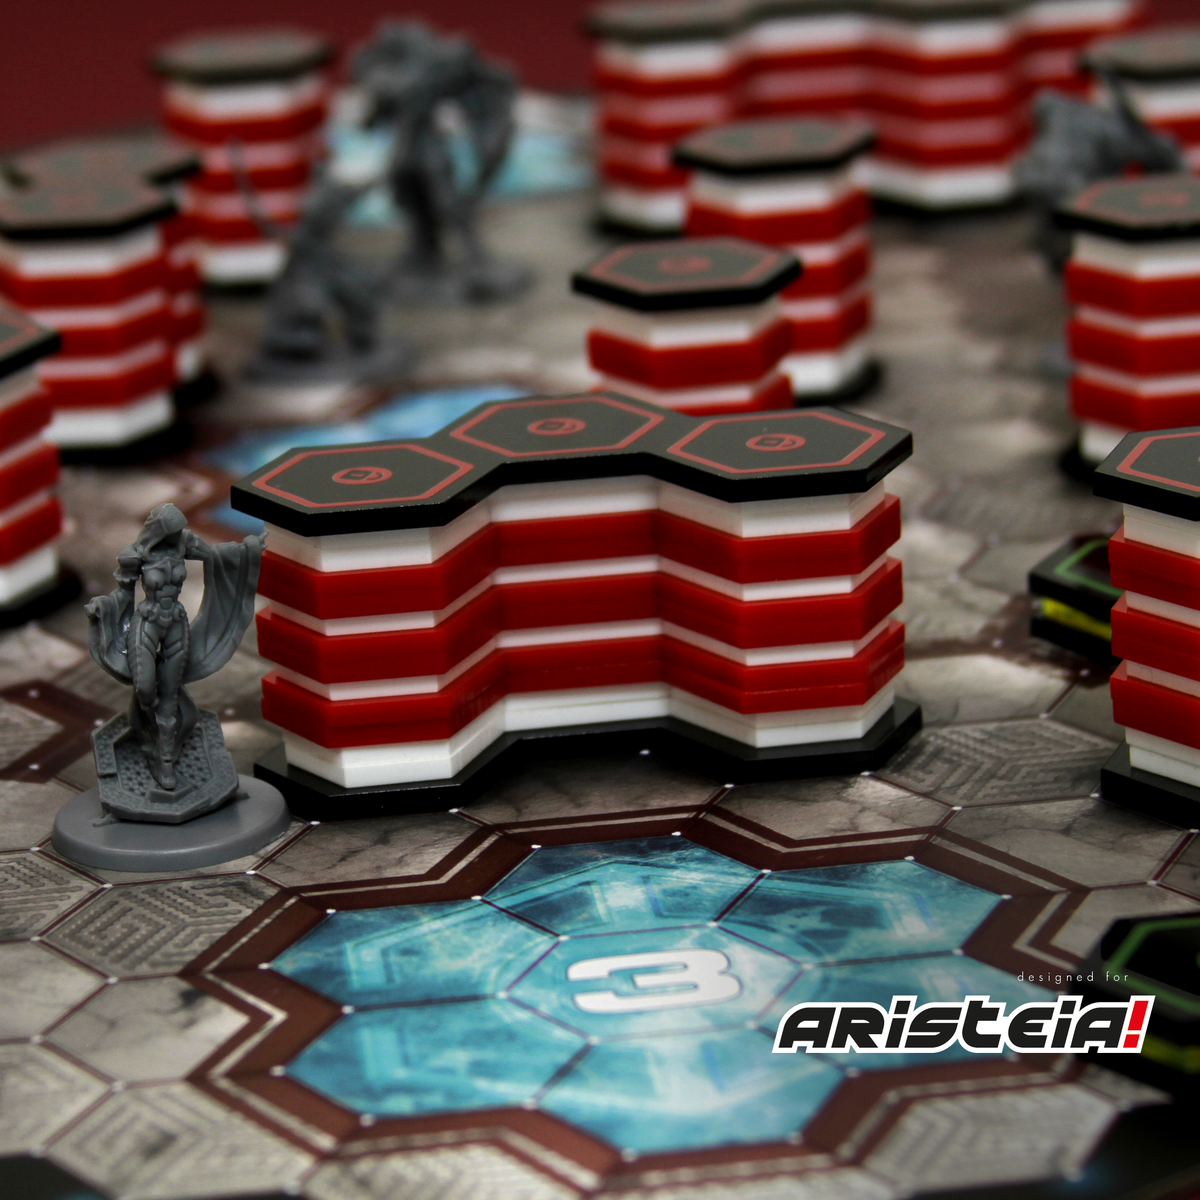 Aristeia! Premium Full Color Walls and Obstacles